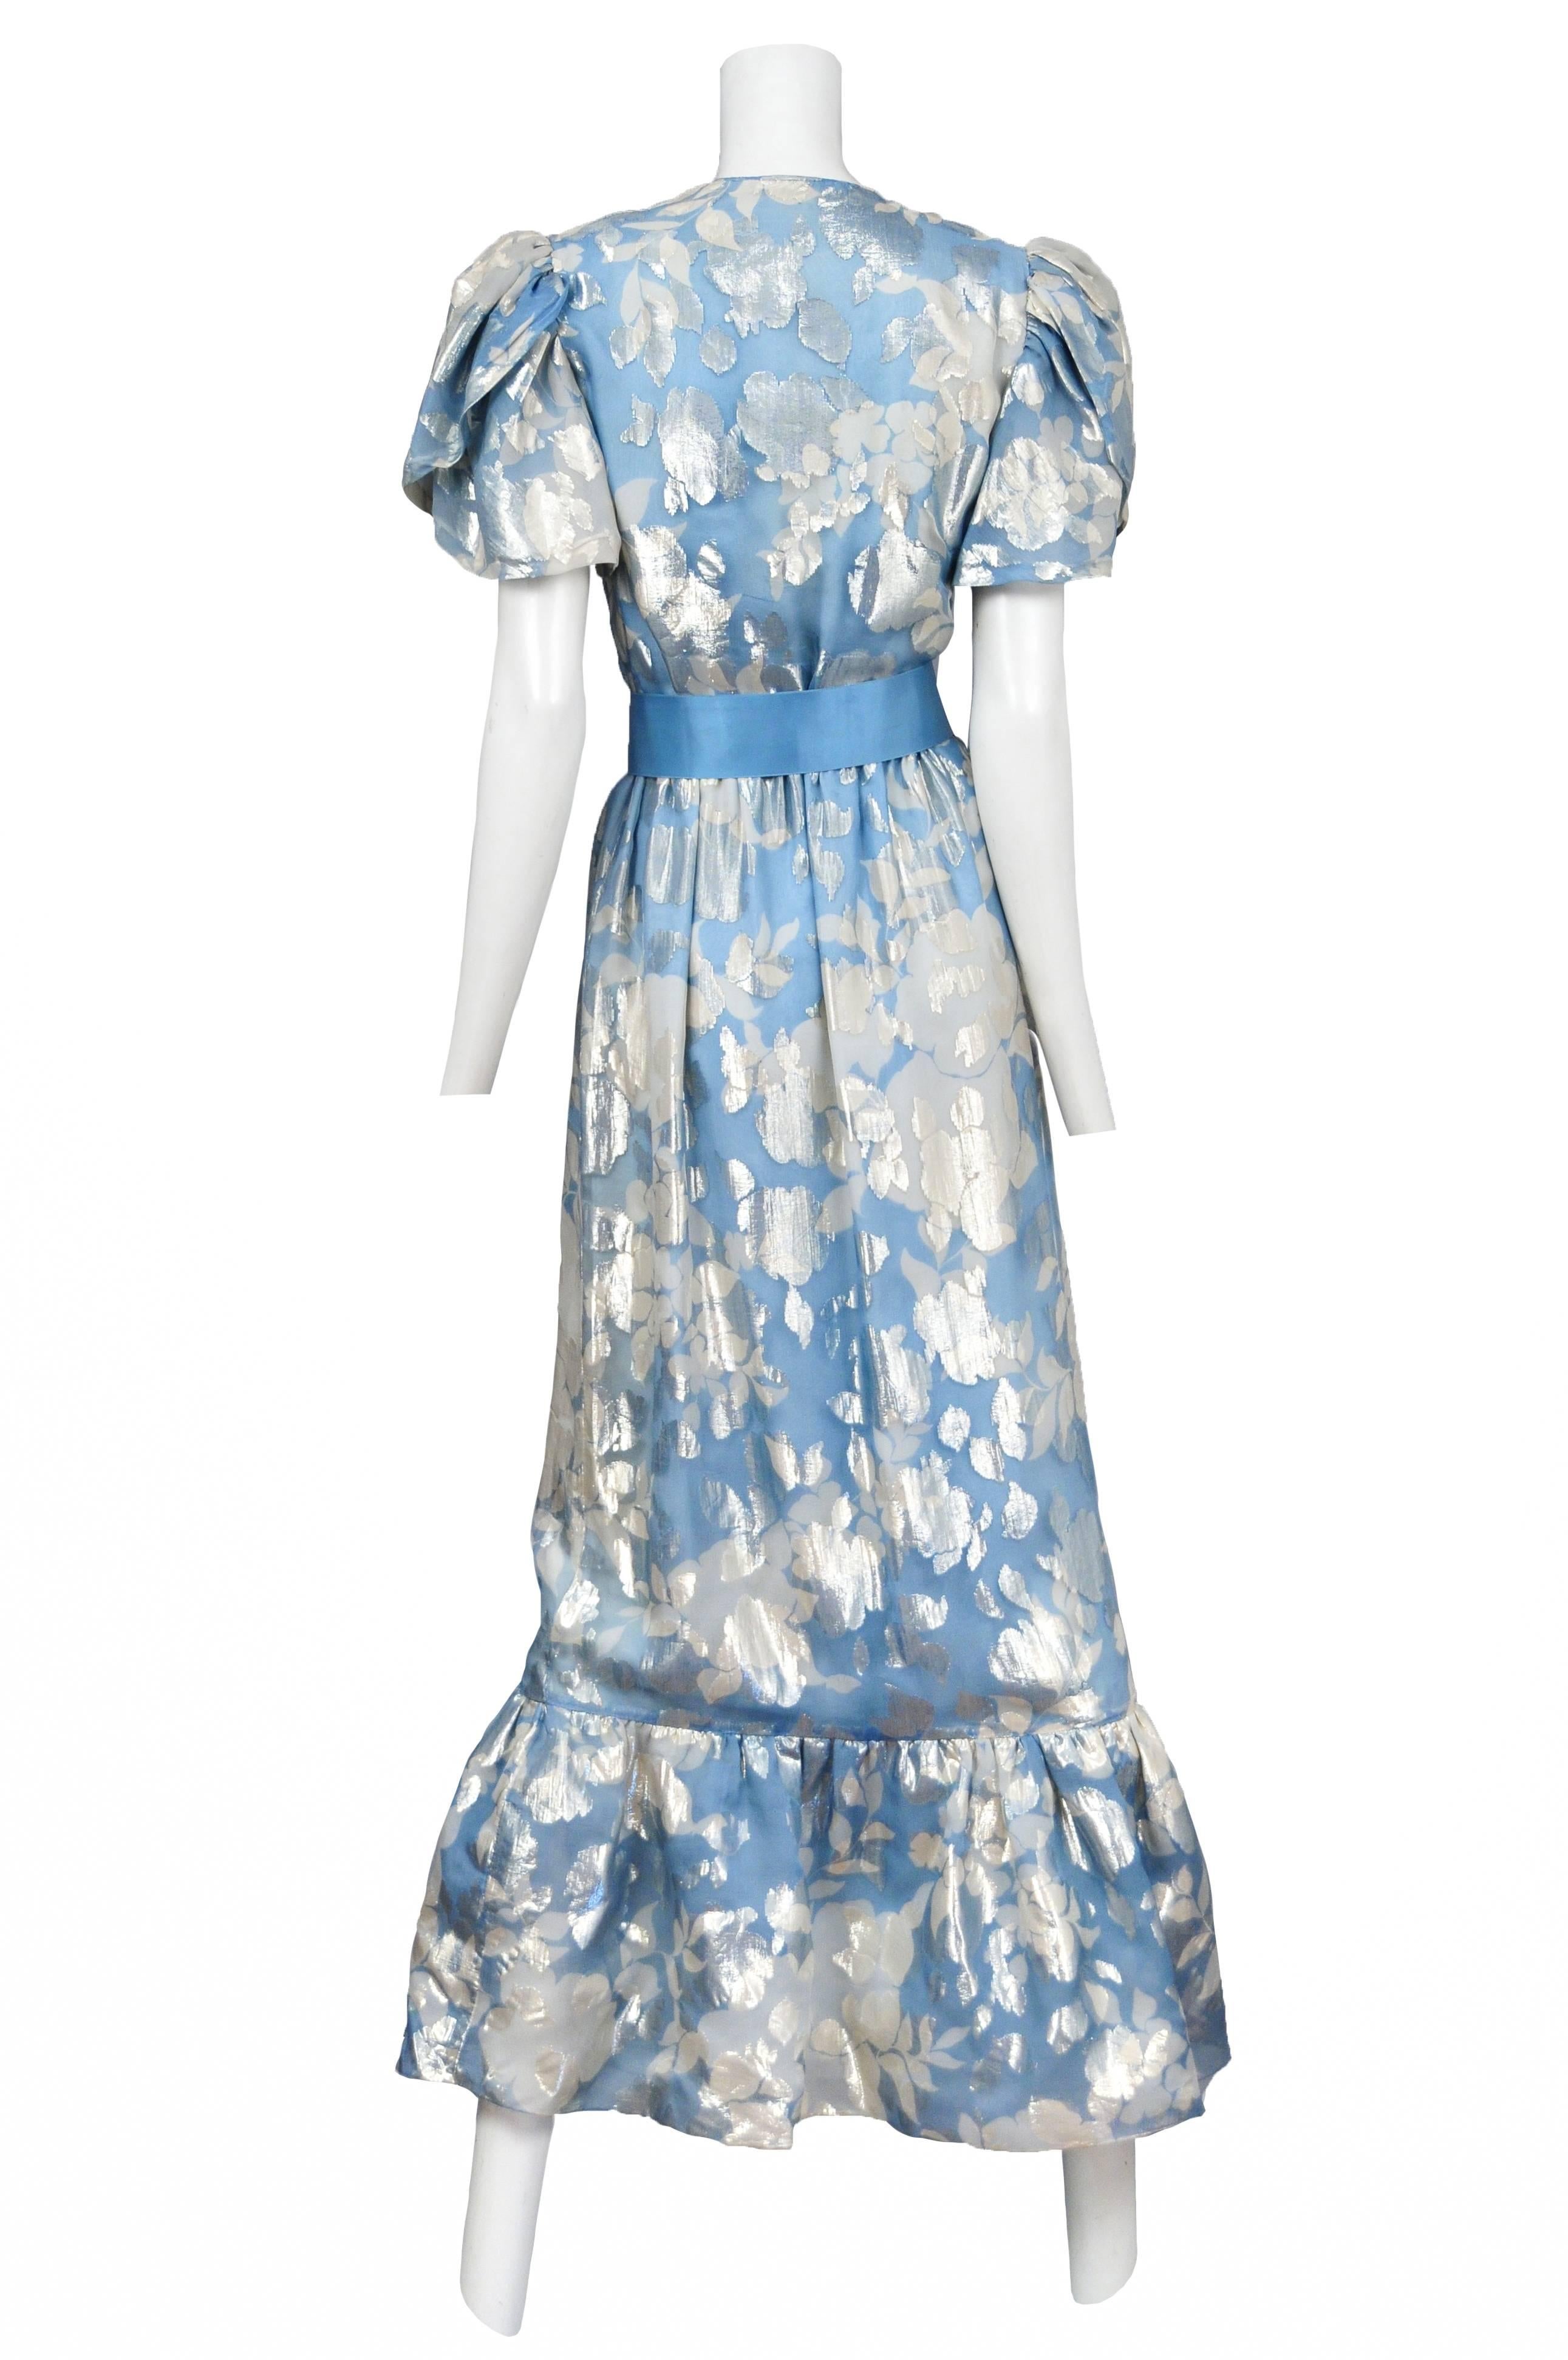 Vintage Hanae Mori blue and silver metallic floral gown featuring puffed short sleeves, an overlap neckline, a flounce at the hem and a matching blue satin ribbon belt.